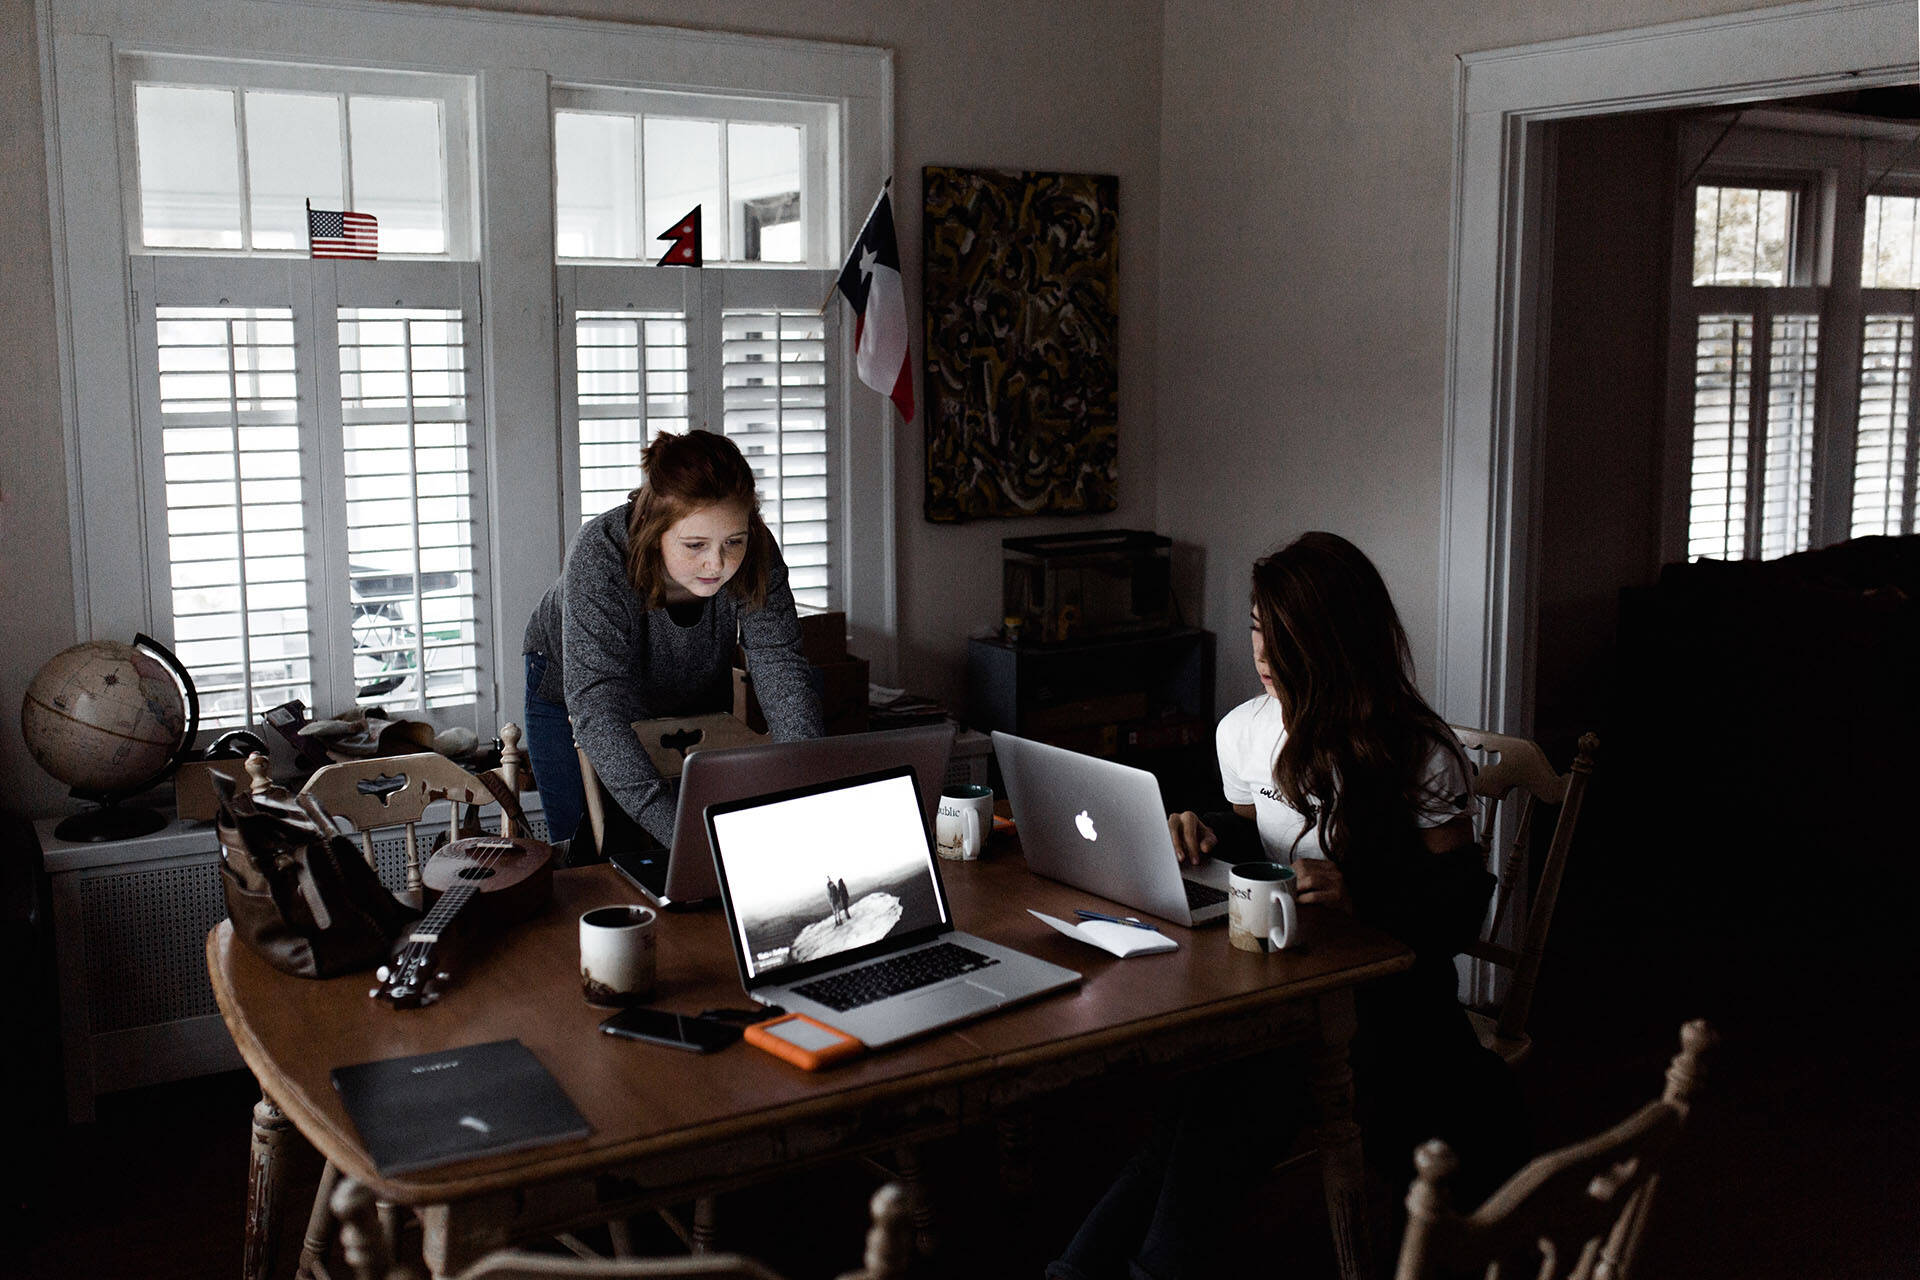 Two female students using a dining room as a home office